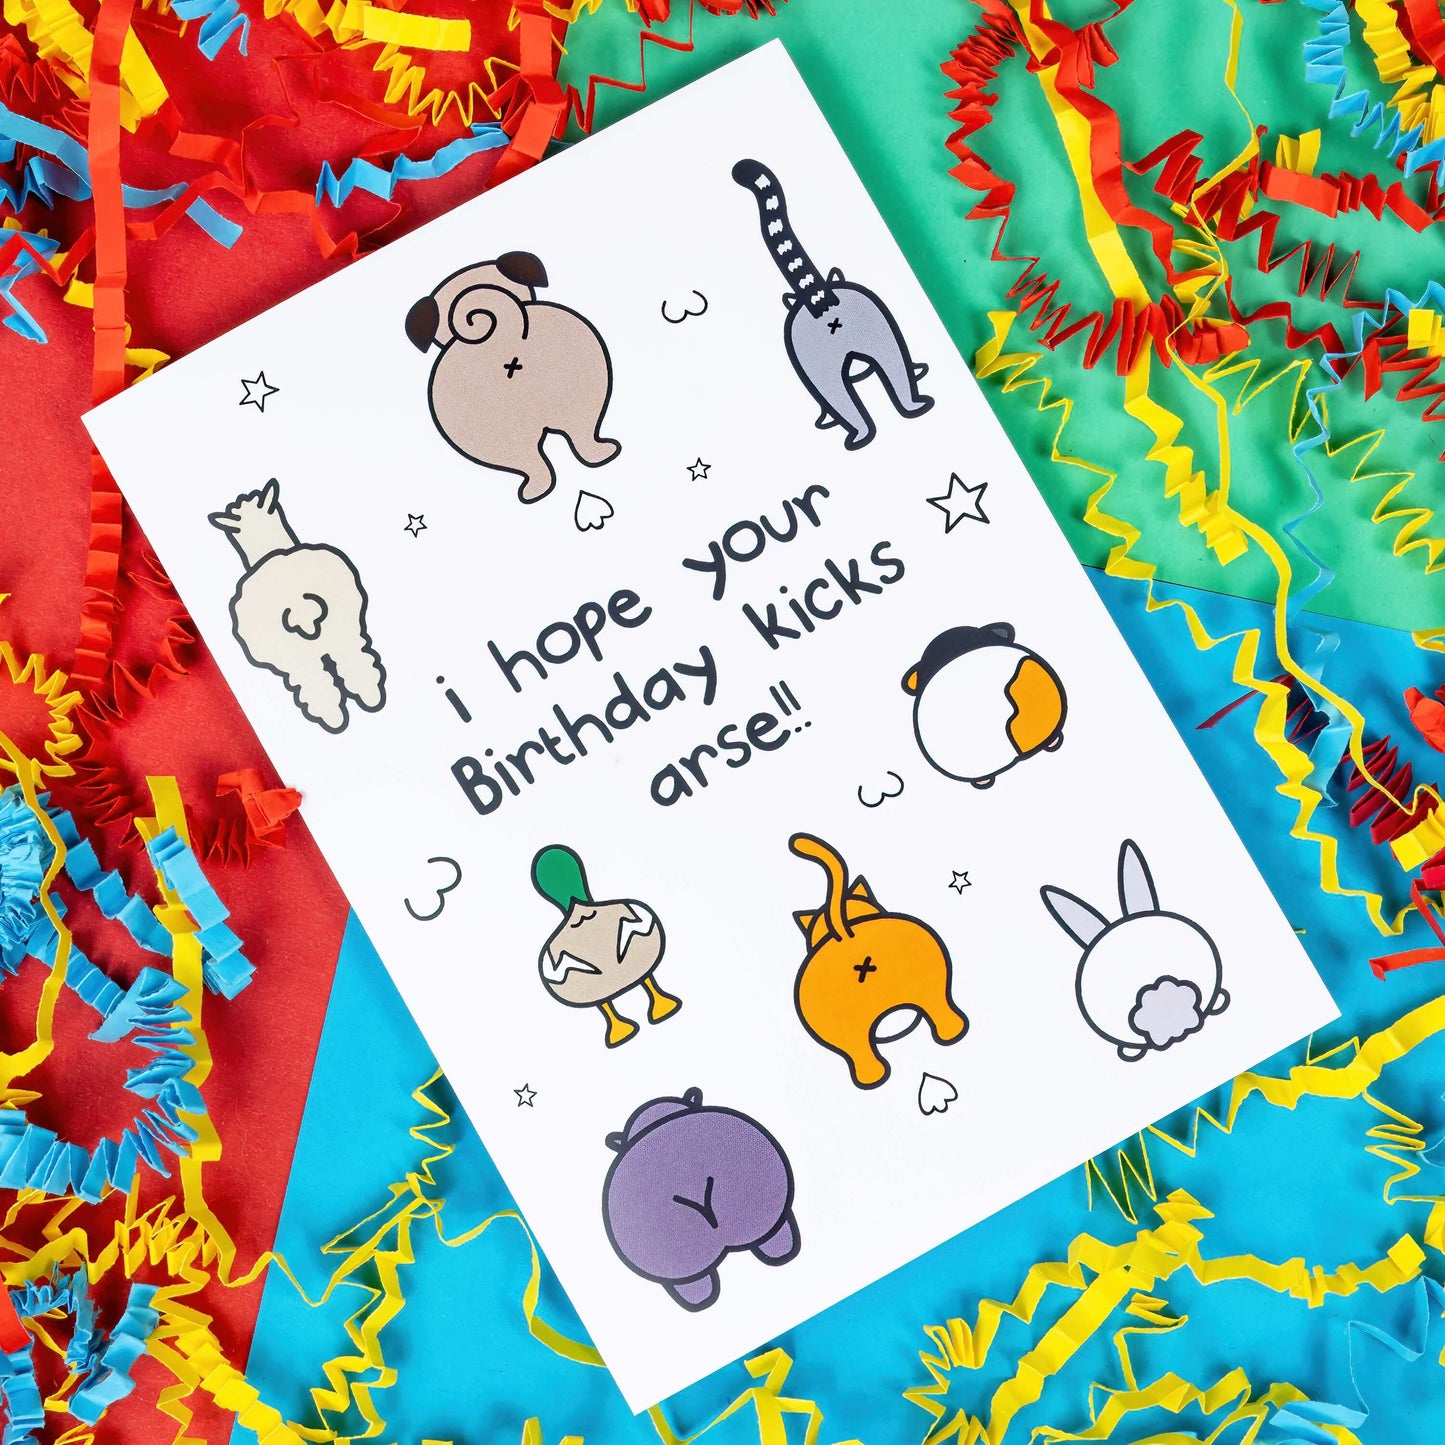 The I Hope Your Birthday Kicks Arse Card on red, blue and green card with red, yellow and blue crinkle card. The a6 white cheeky birthday card with various animal illustrations with their backs to the cameras showing their bums. 'I hope your Birthday kicks arse!!' is written in black on the card.